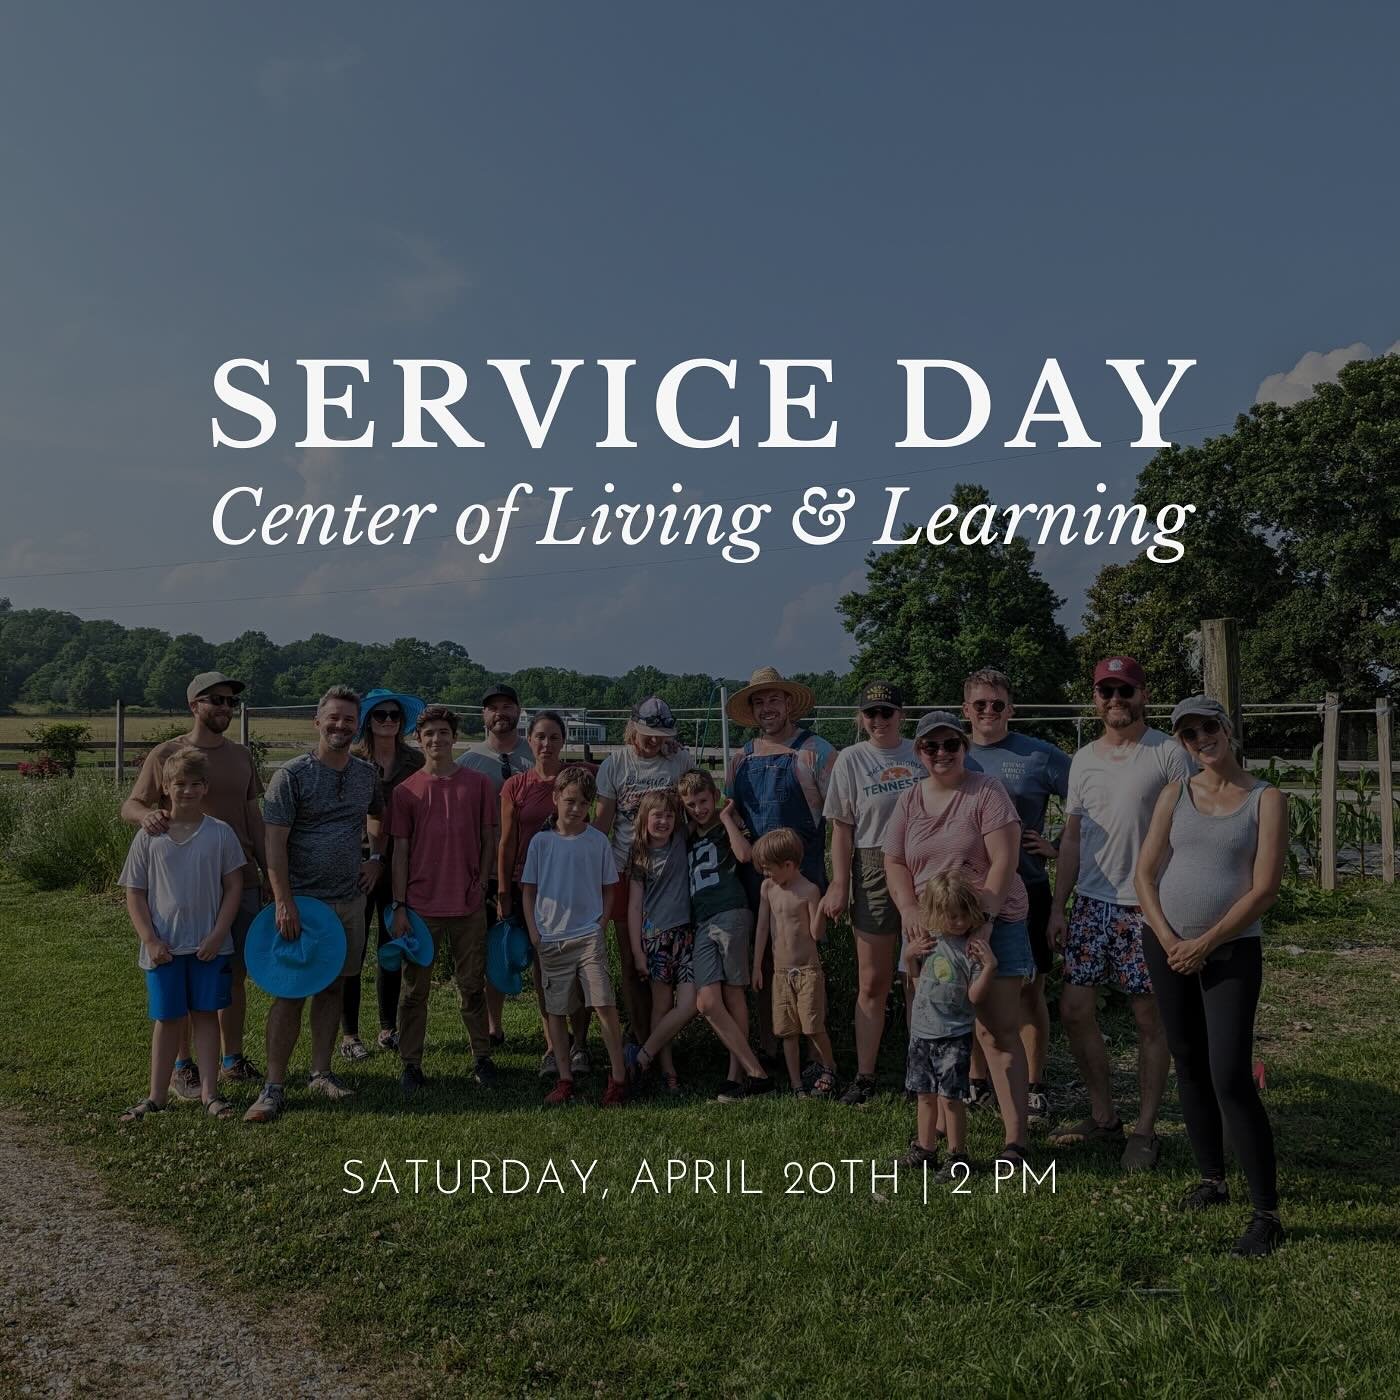 Our next Service Day at The Center for Living and Learning will be held on Saturday, April 20th from 2-4 PM. Please register at the link in our bio!

If you&rsquo;re unfamiliar with The Center, they are a residence located on a beautiful, therapeutic